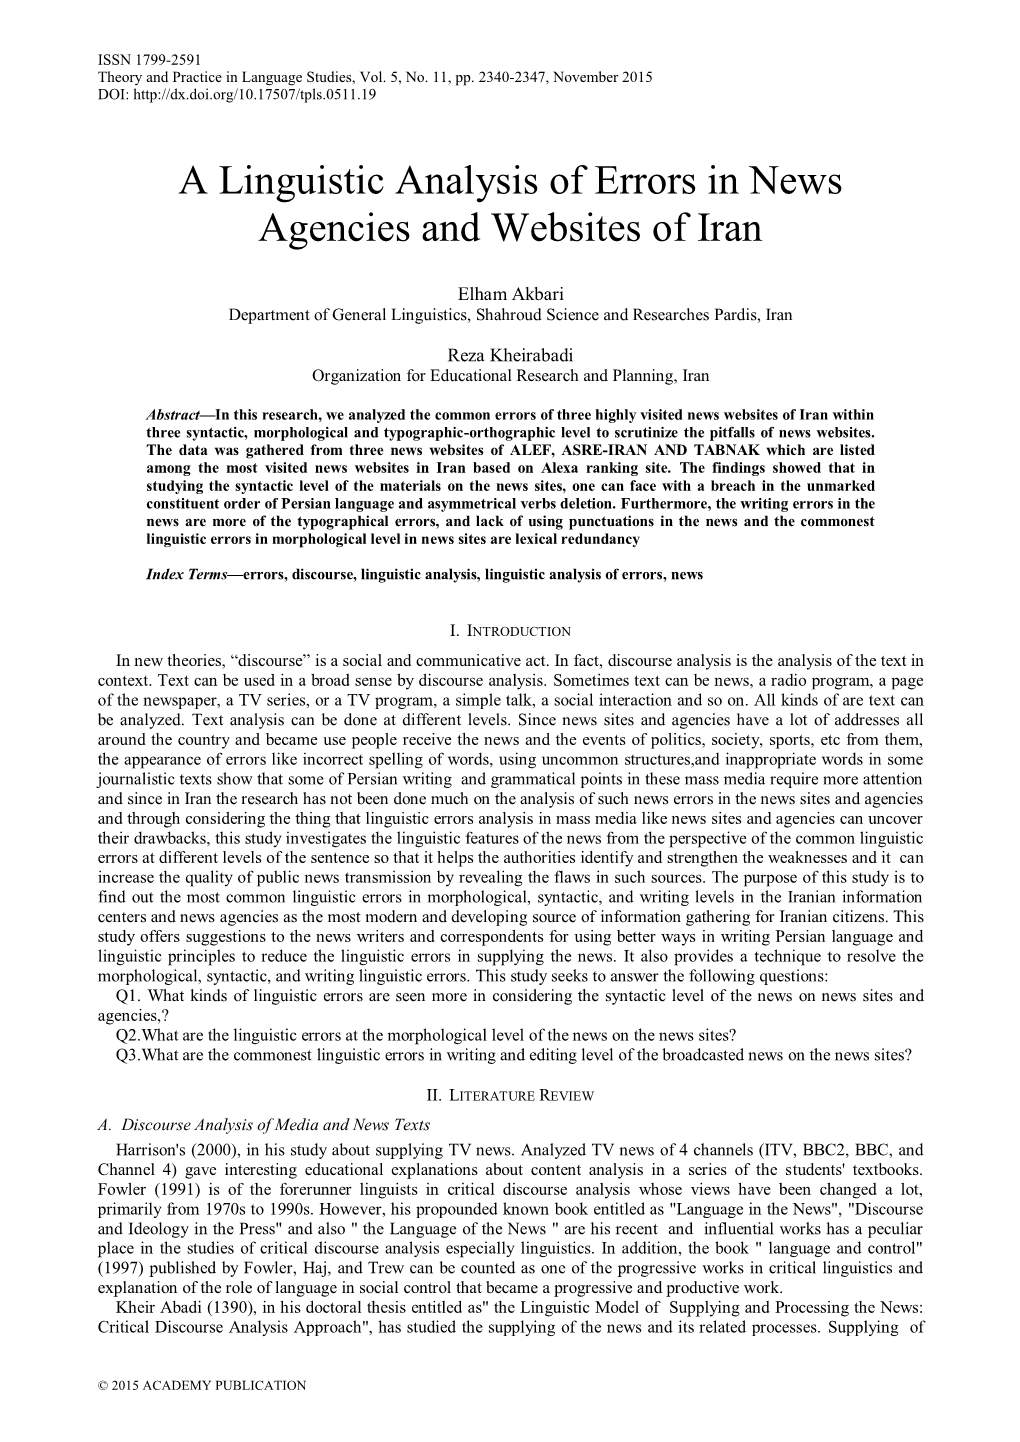 A Linguistic Analysis of Errors in News Agencies and Websites of Iran